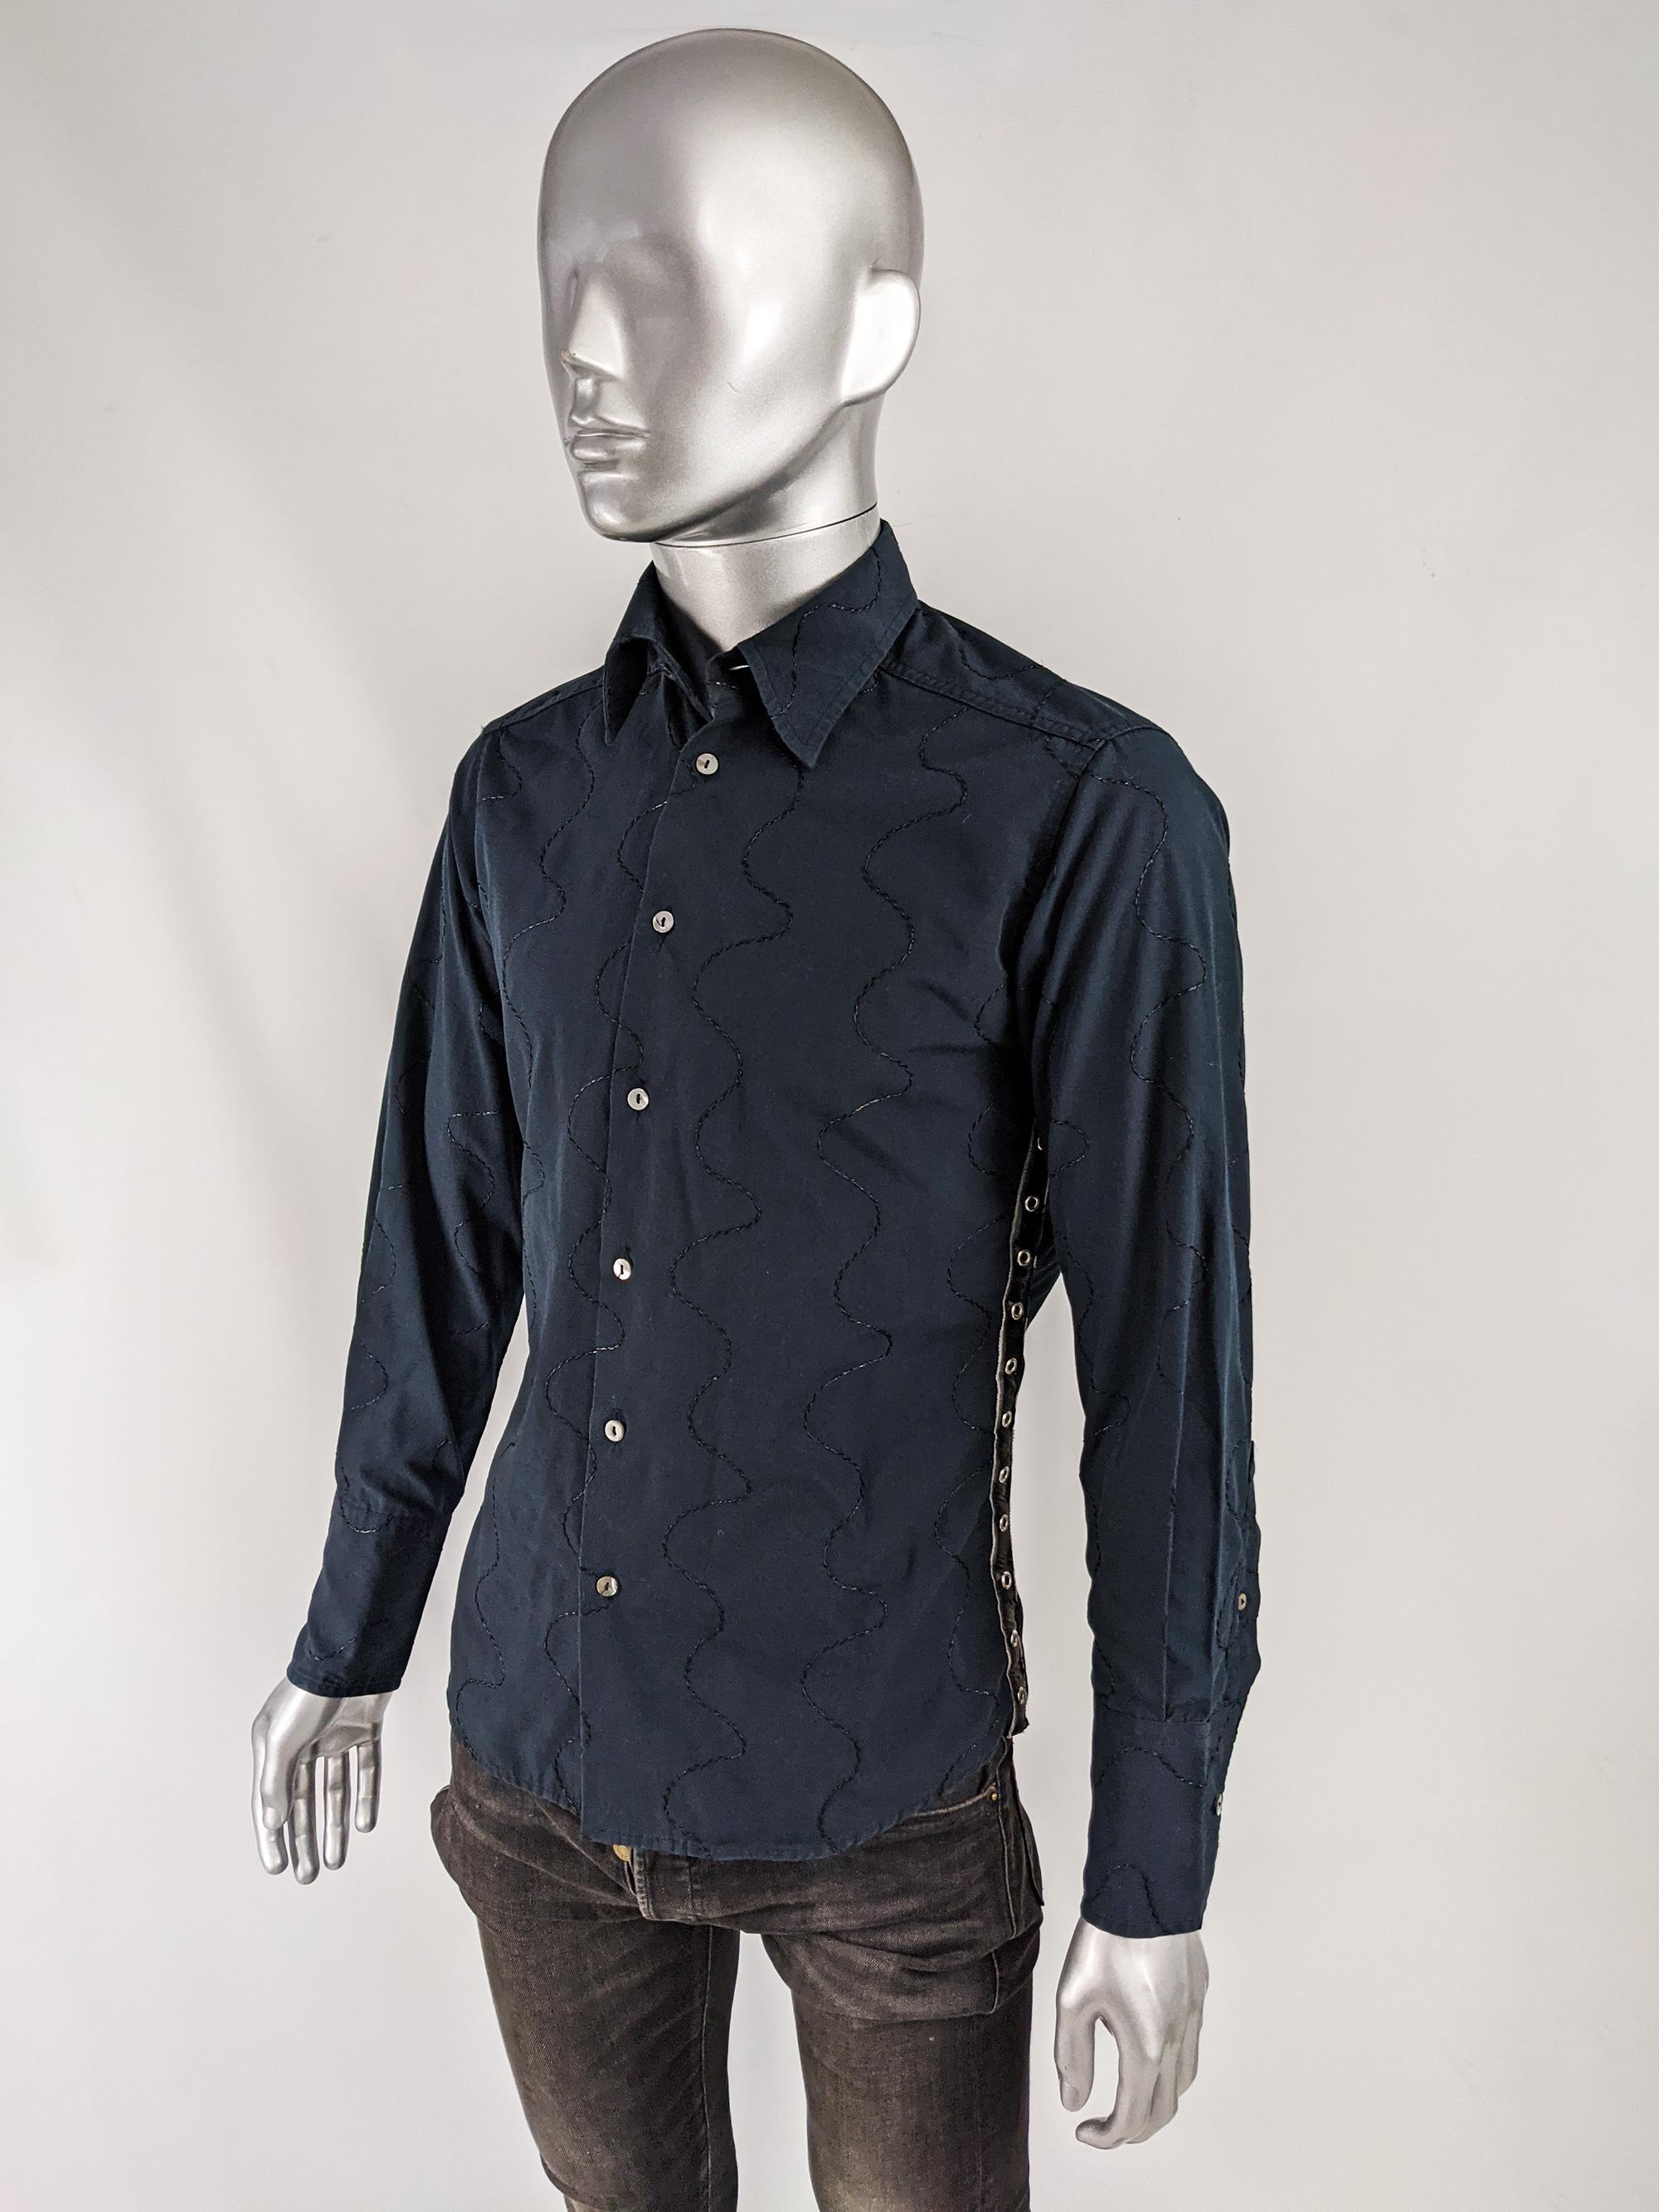 An incredible preowned mens Daniele Alessandrini long sleeve party shirt in a dark blue fabric with amazing black satin embroidery / chain stitch throughout. Impeccable quality, with the stitching matched across the panels, long barrel cuffs and